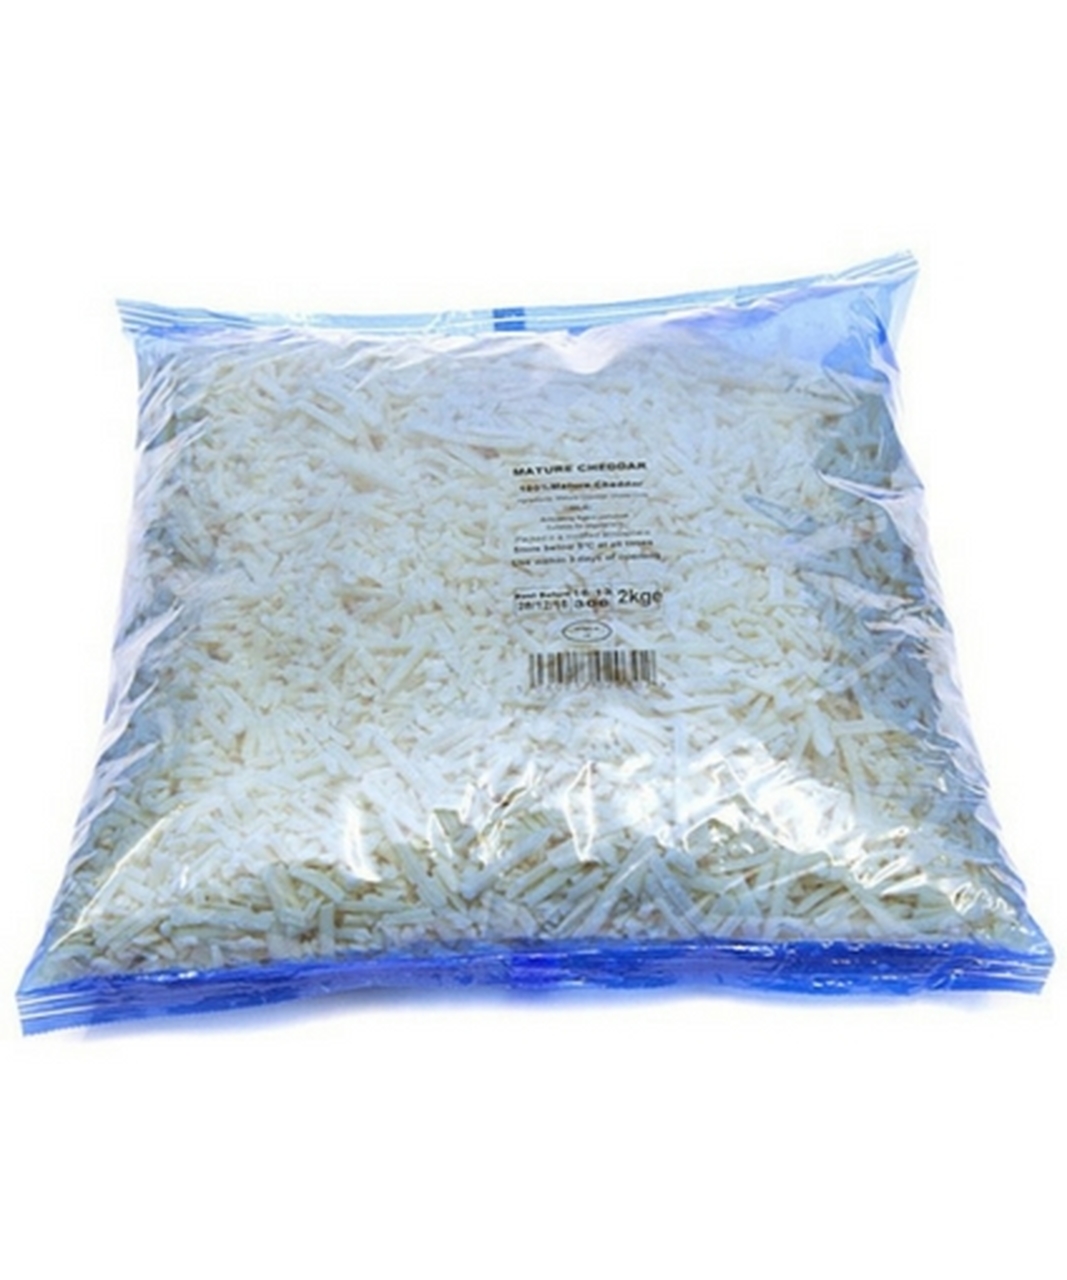 Grated Mature Cheddar Cheese - 2kg Bag